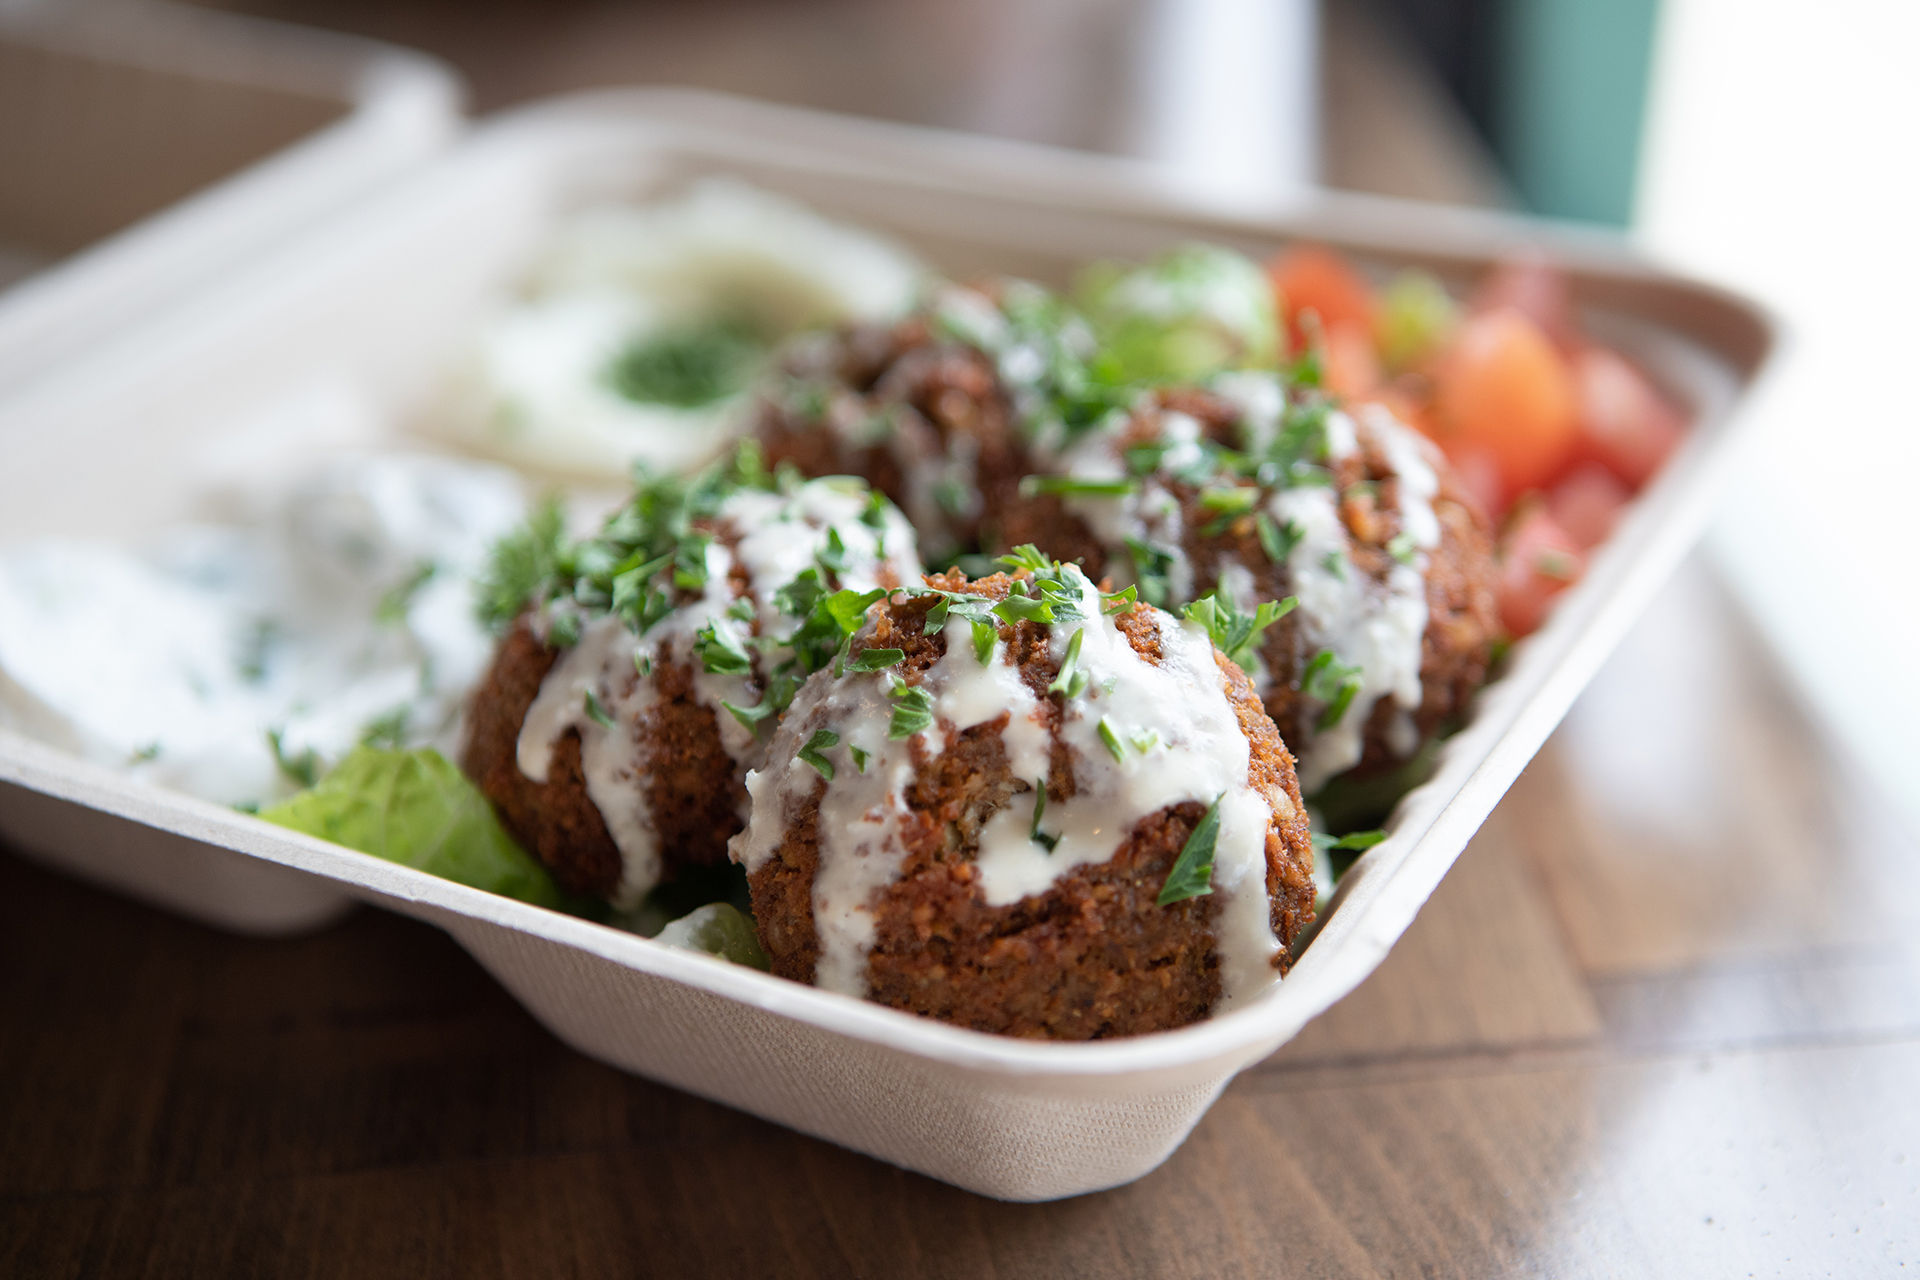 The Falafel Plate is pictured topped with tahini sauce and fresh parsley. The plate is served on top of a bed of lettuce, accompanied by spicy labneh and garlic paste sides.